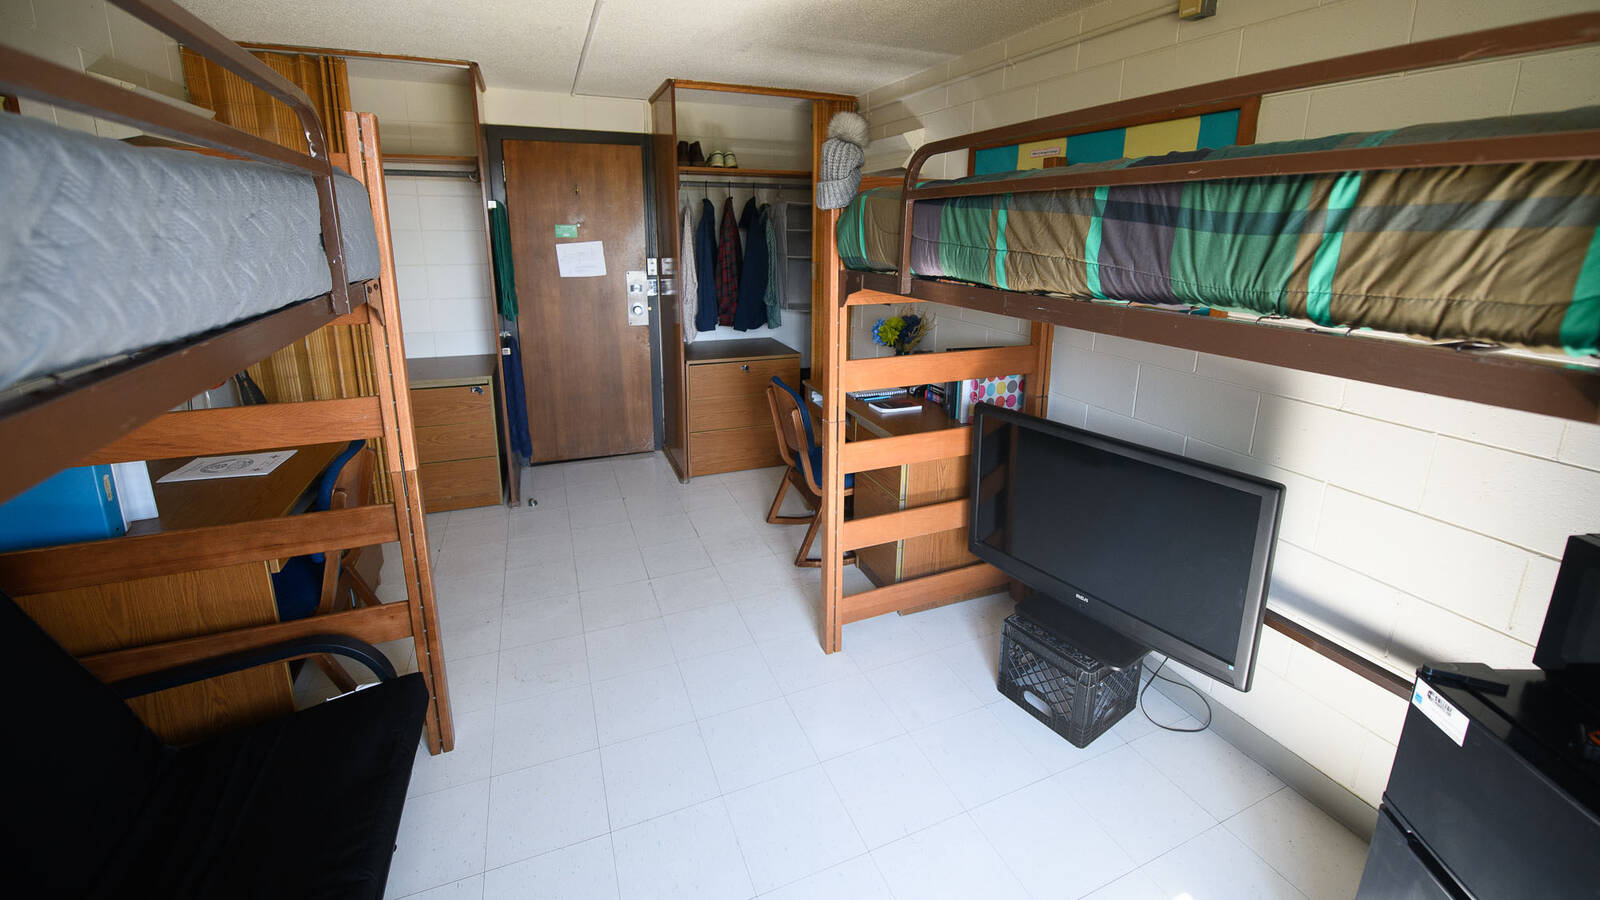 Double room in Horan Hall (viewed from the wall opposite the door) with two beds, chairs, desks, and closet spaces.